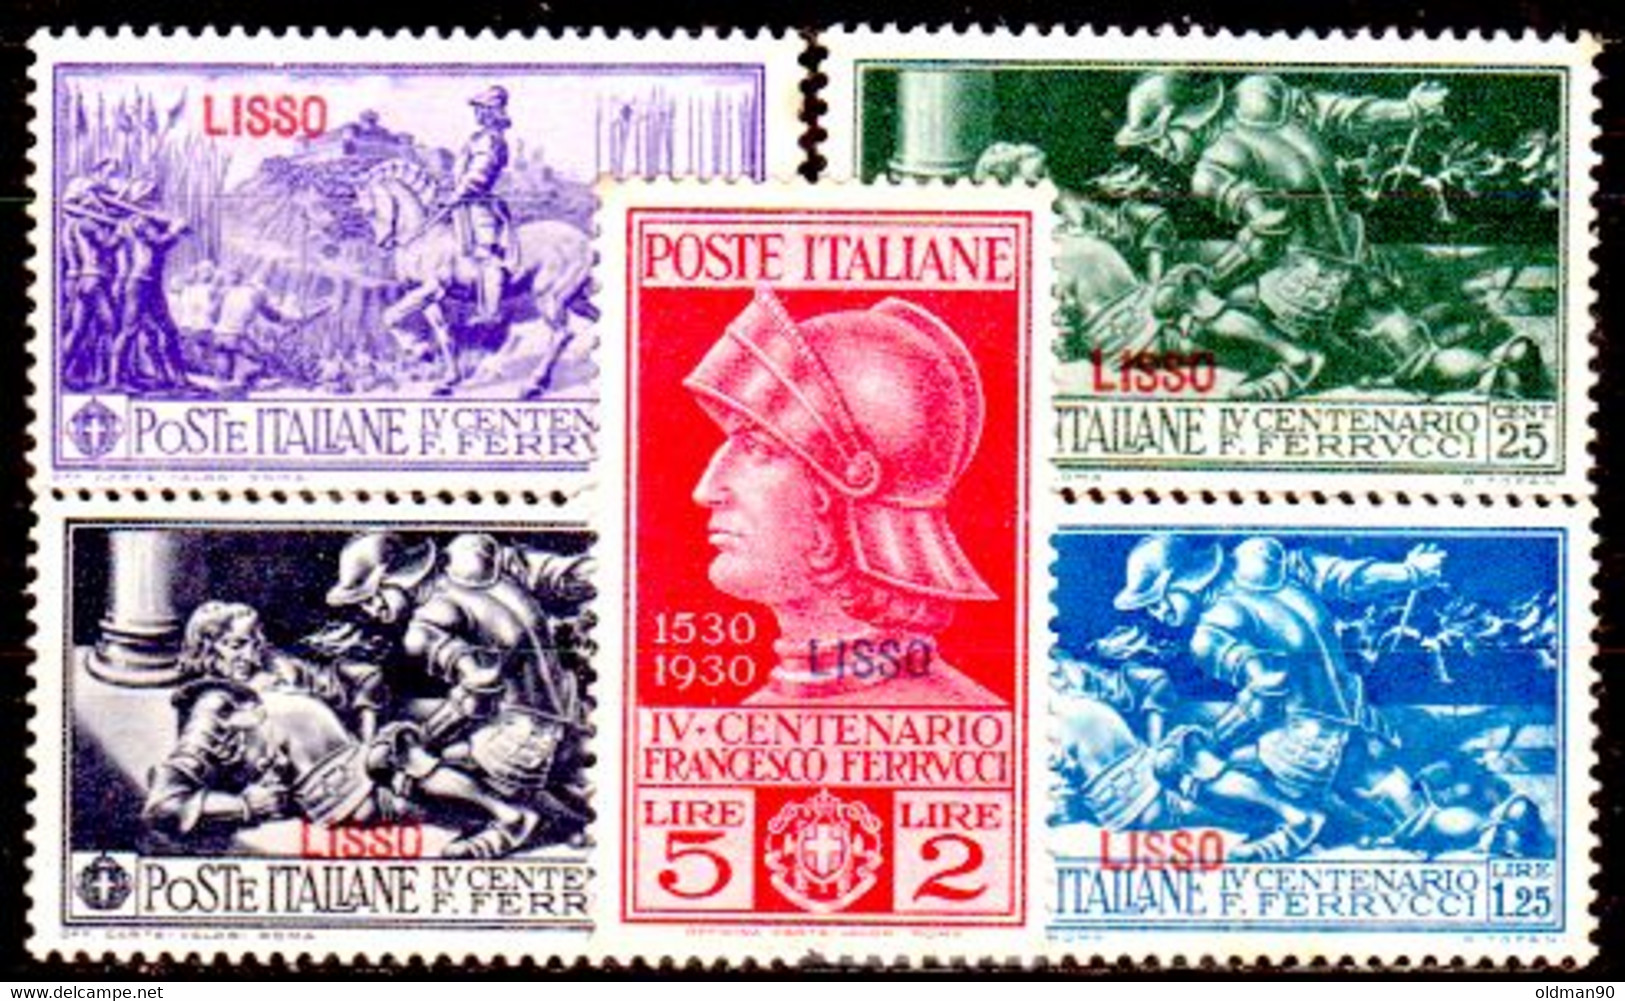 Egeo-OS-300- Lipso: Original Stamps And Overprint 1930 (++) MNH - Quality In Your Opinion. - Egée (Lipso)